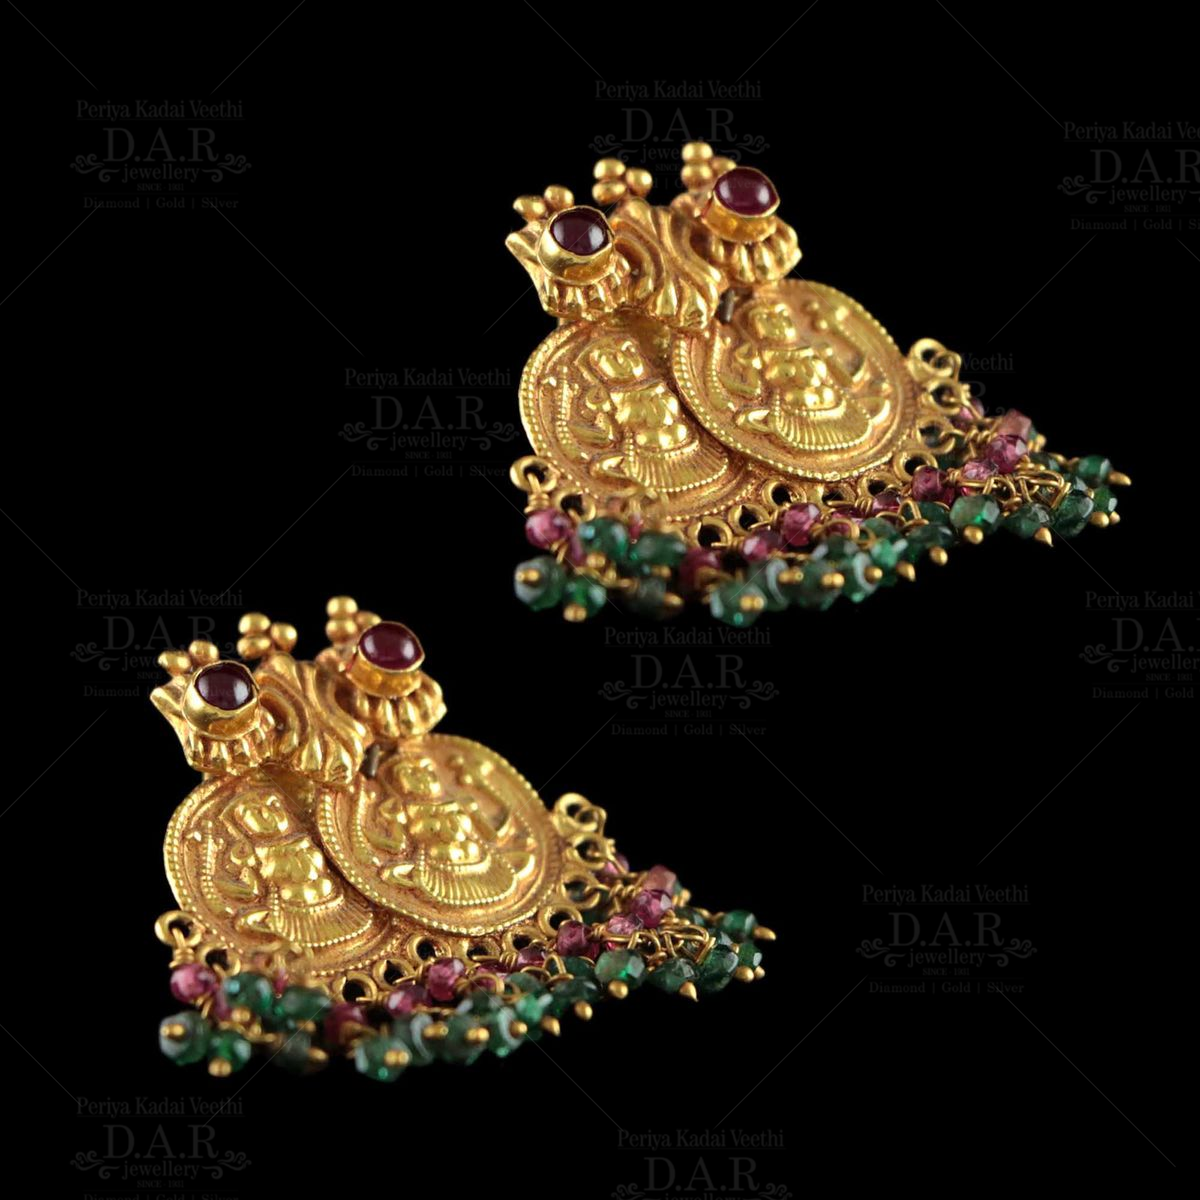 Buy Traditional Indian Temple Jewellery Antique Gold Finish Jhumkas Earrings  Online